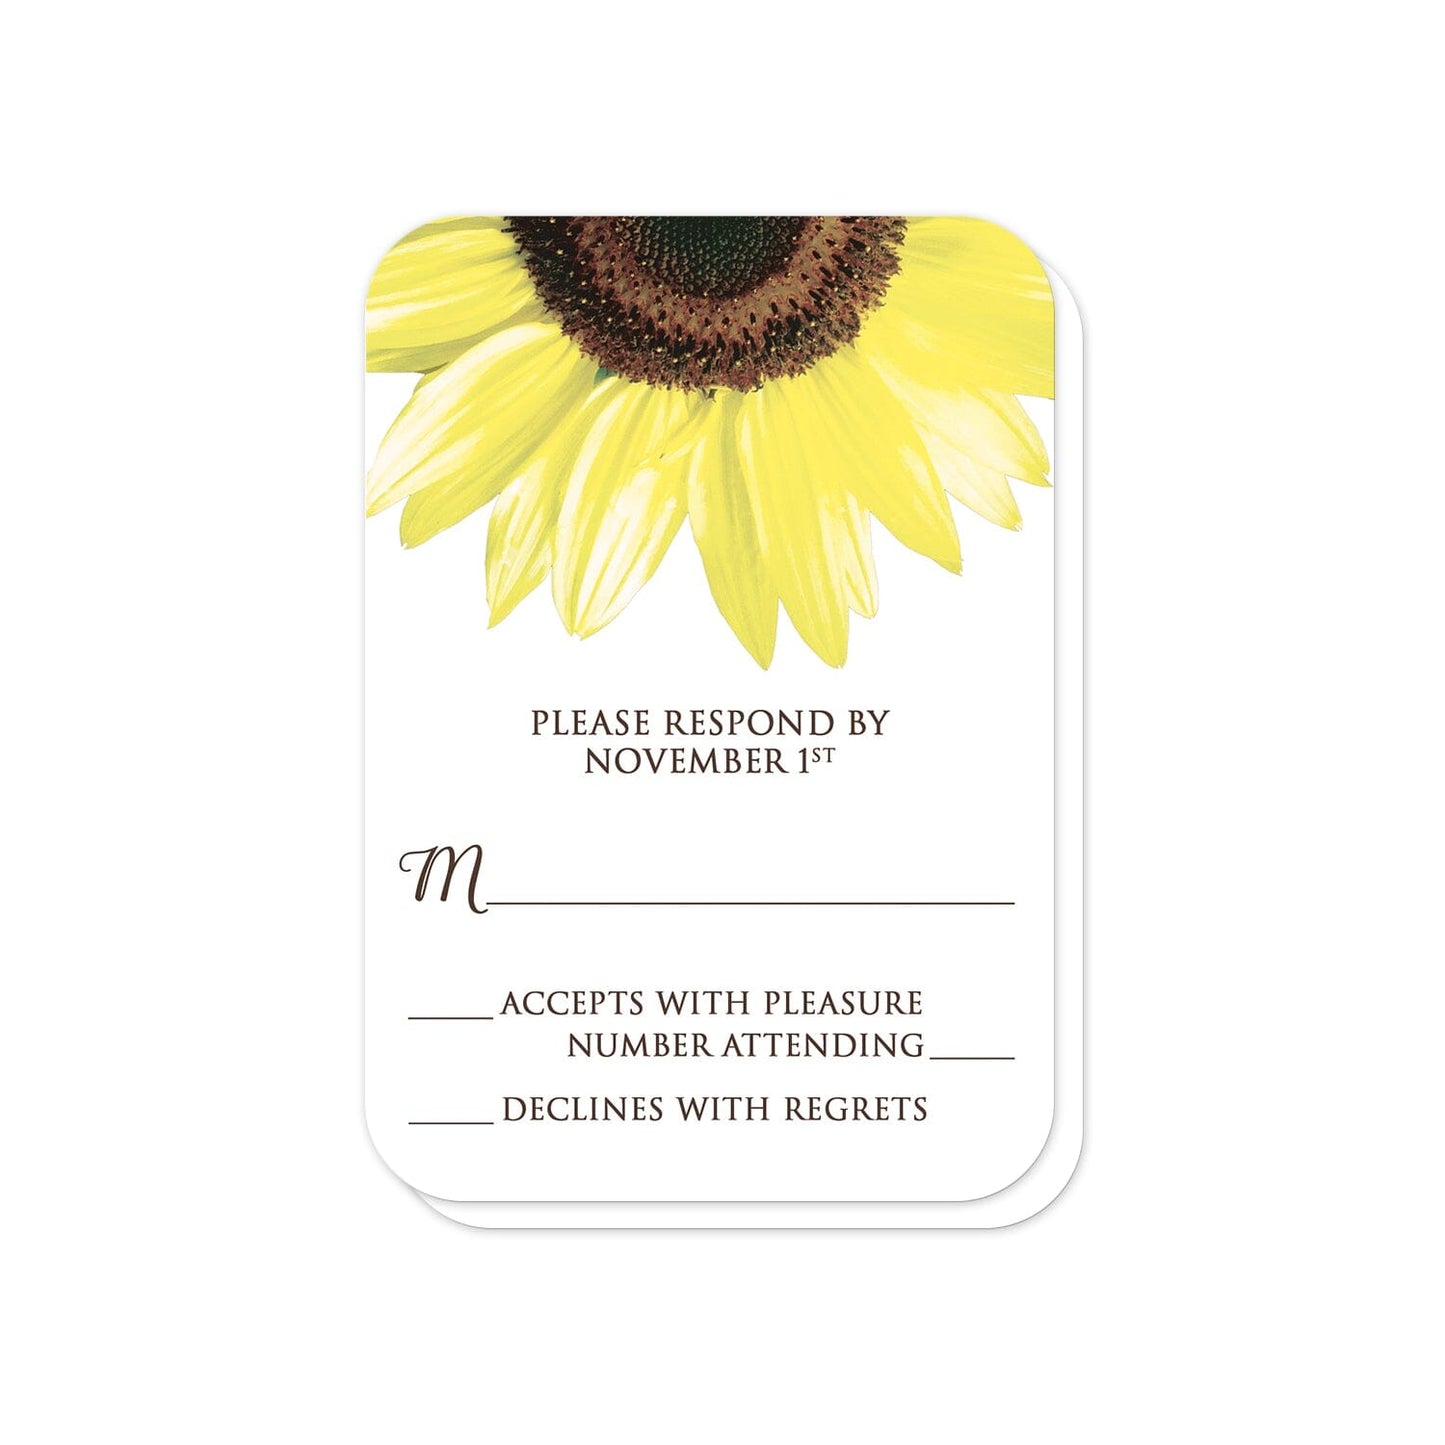 Rustic Sunflower and Wood RSVP Cards (with rounded corners) at Artistically Invited.